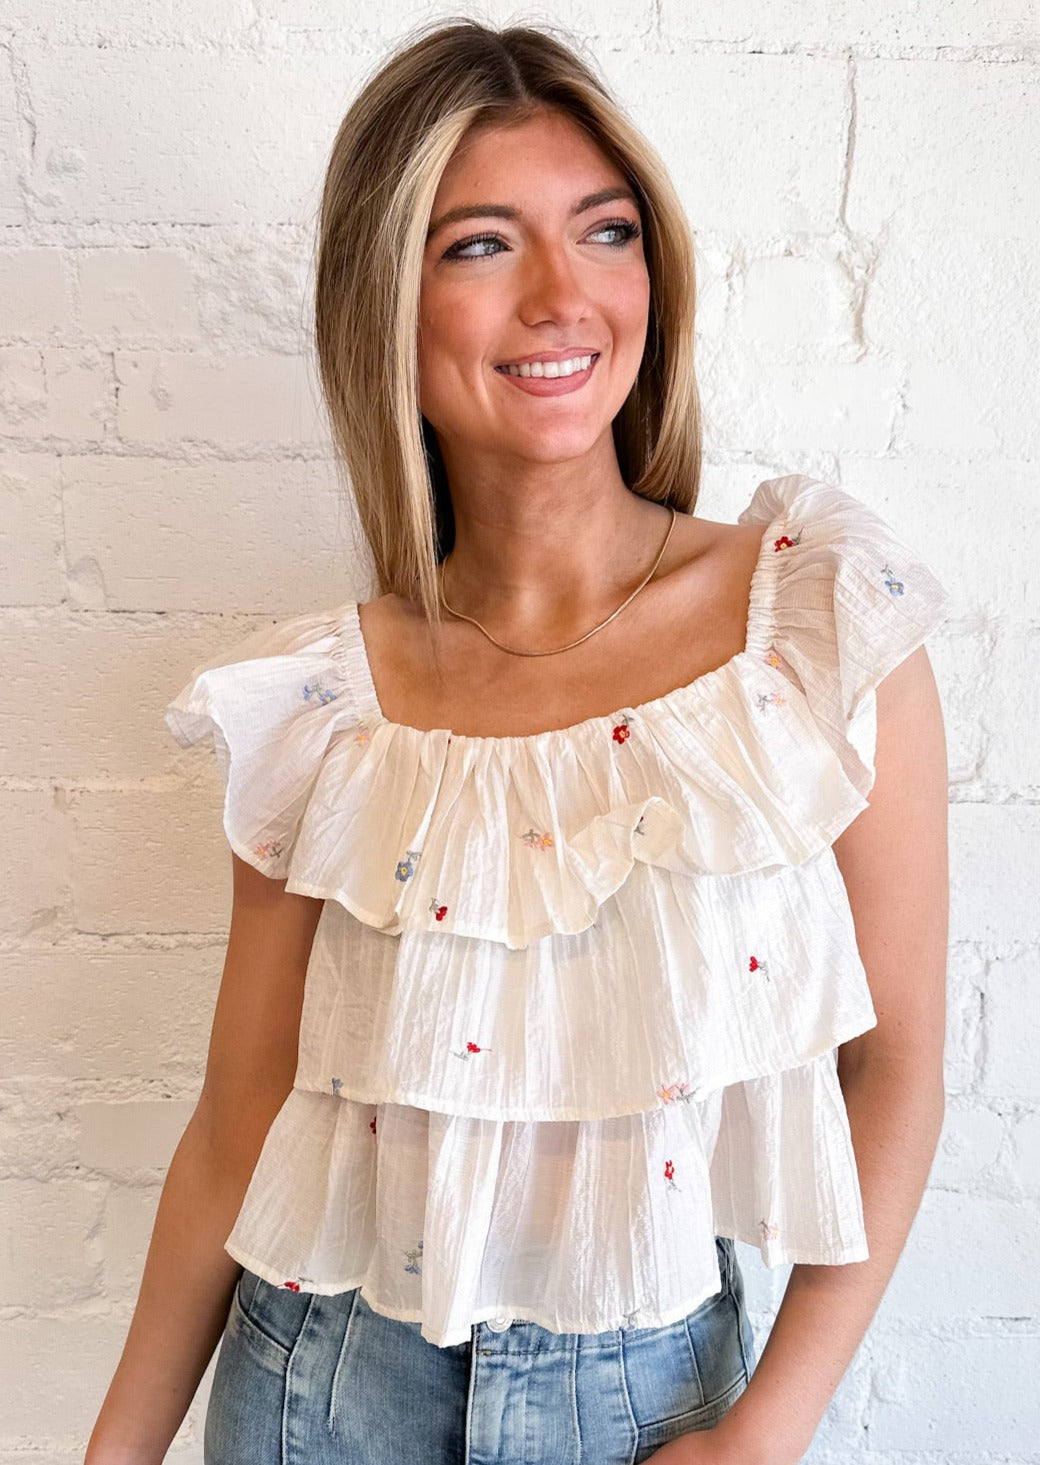 Floral Embroidered Top, Tops, Adeline, Adeline, dallas boutique, dallas texas, texas boutique, women's boutique dallas, adeline boutique, dallas boutique, trendy boutique, affordable boutique